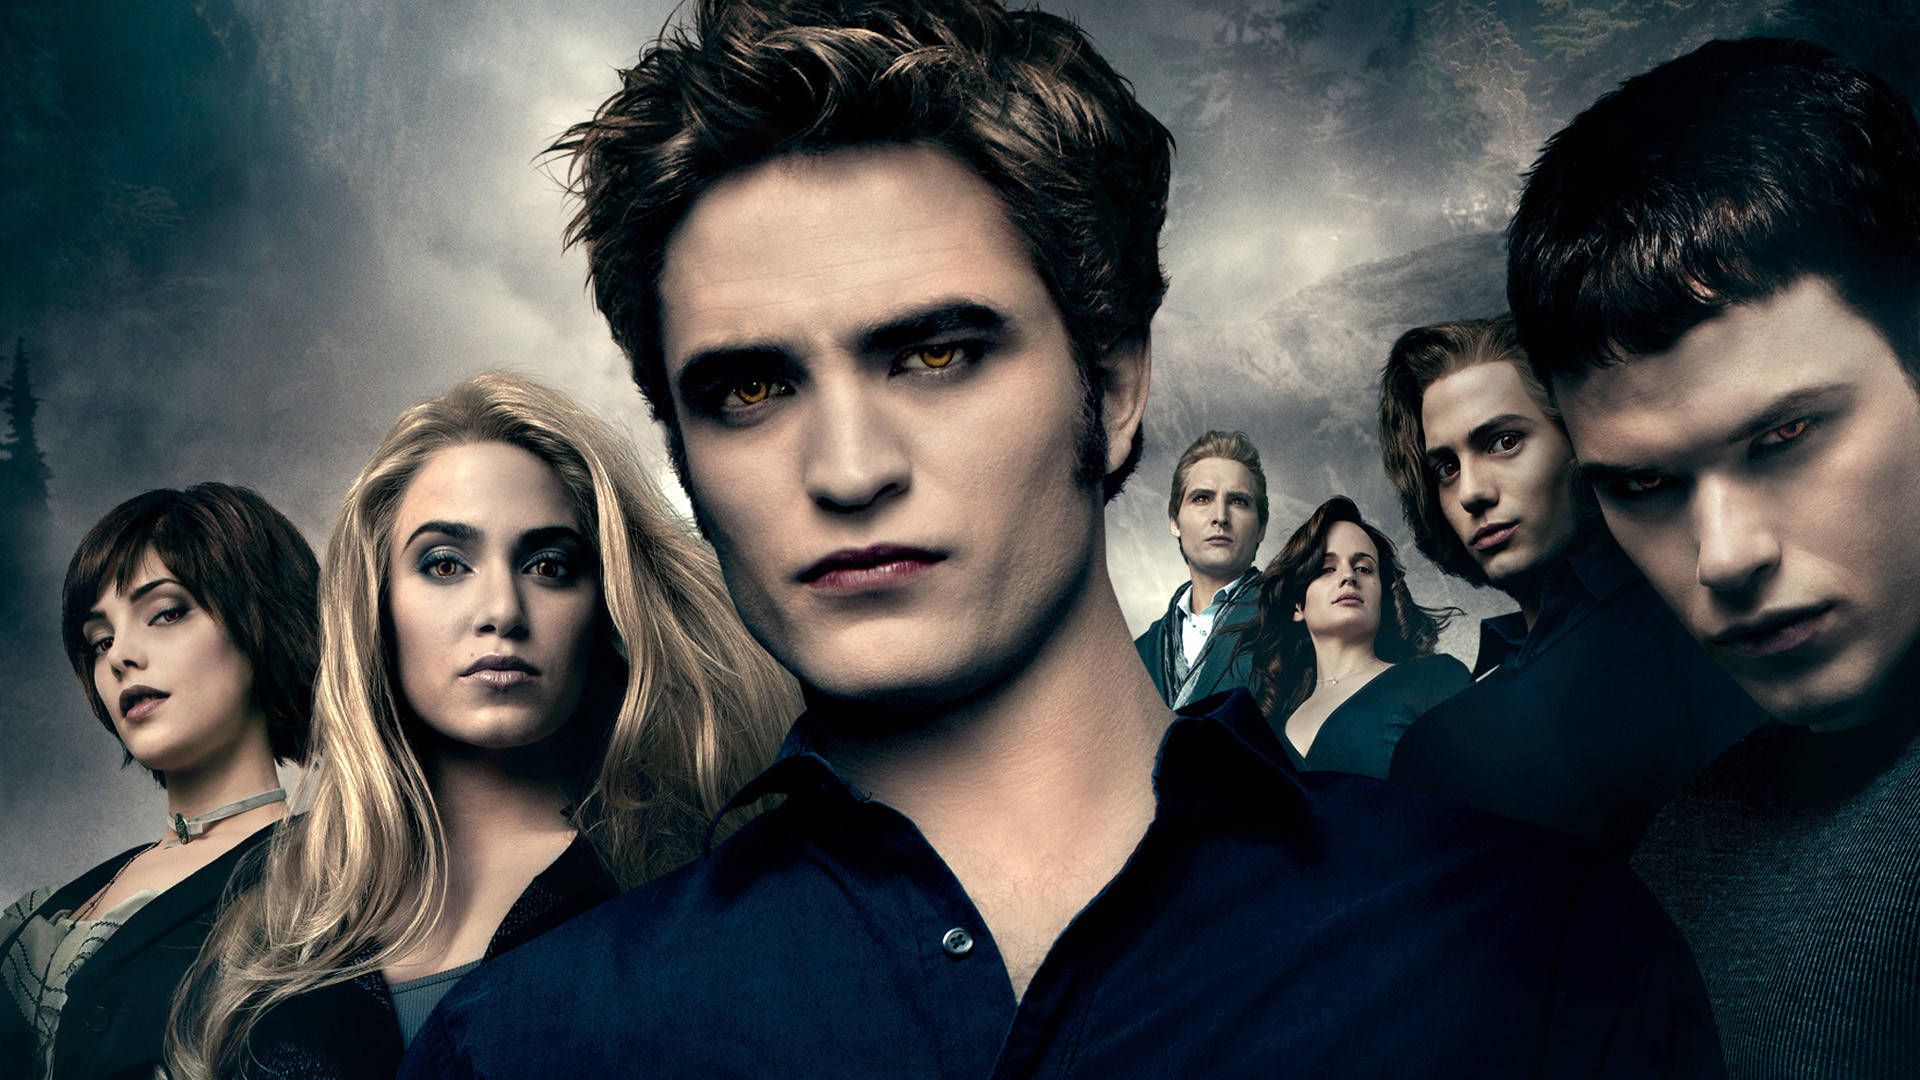 1920x1080 Download The Twilight Saga Eclipse The Cullens Wallpaper